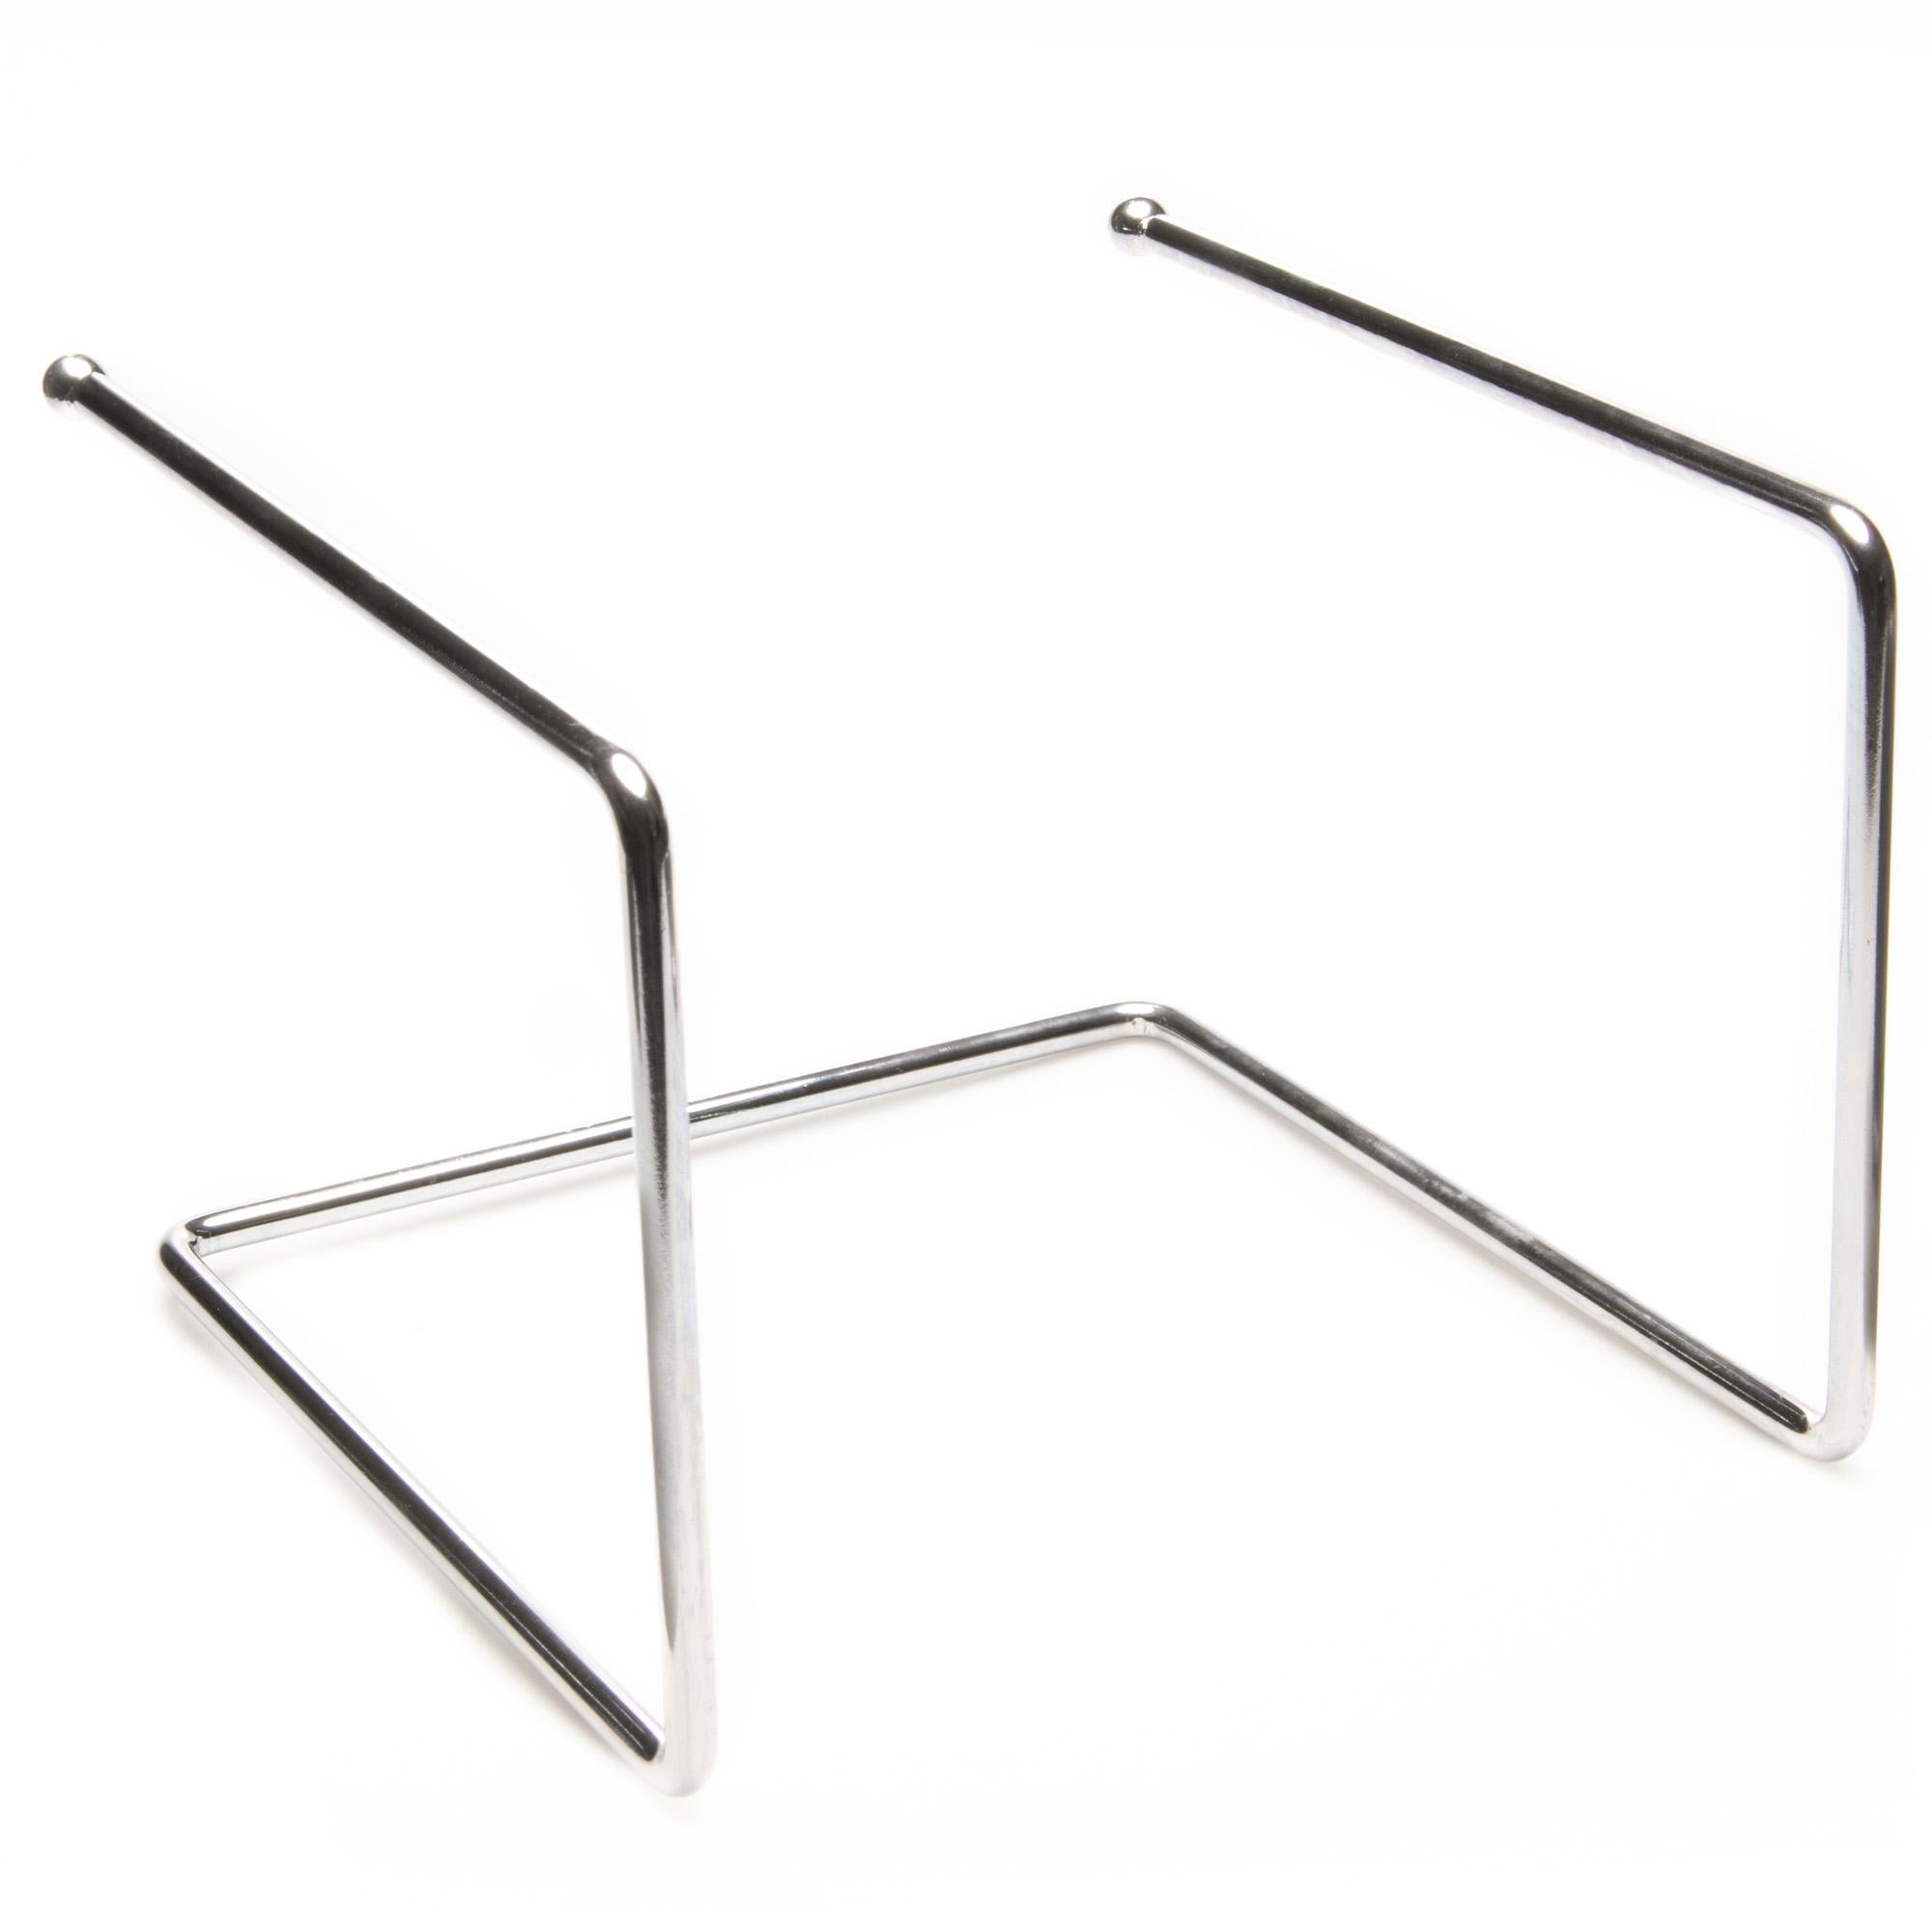 Stainless Steel 7" Pizza Stand